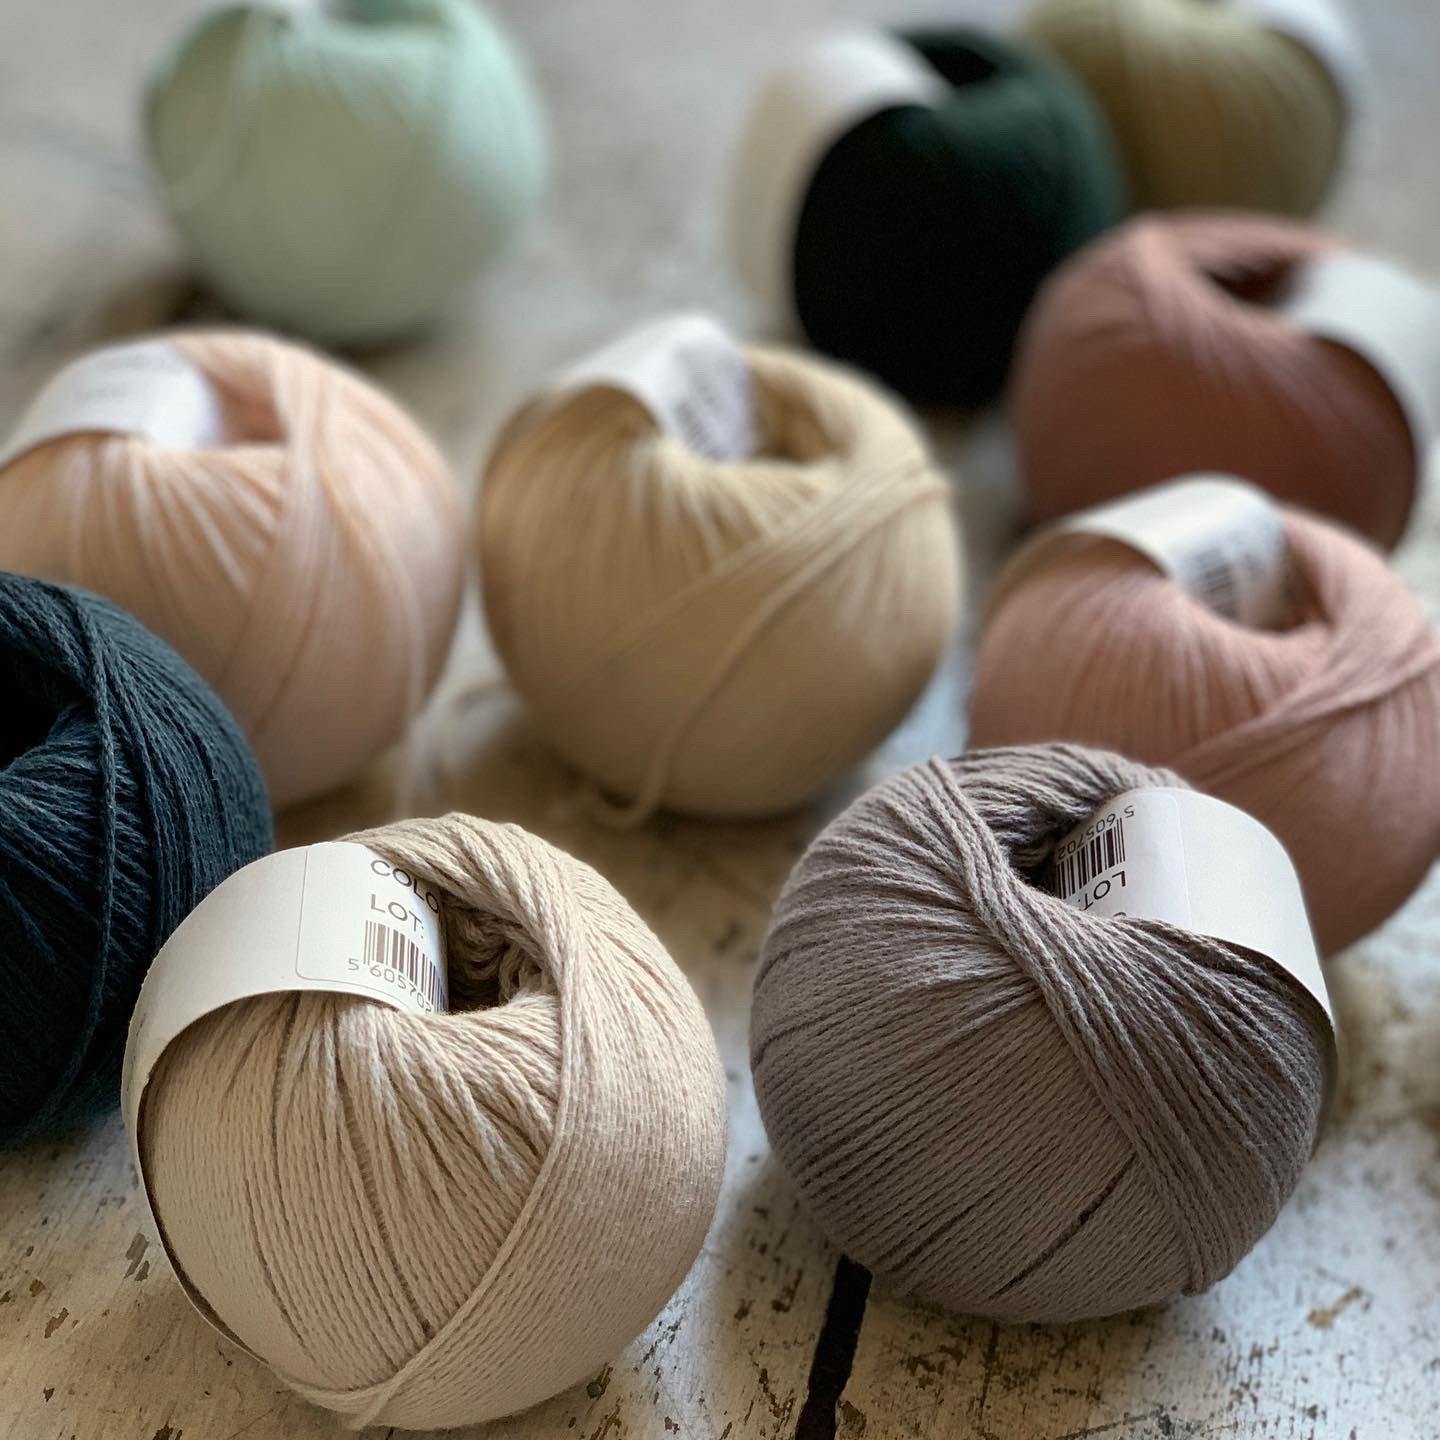 Ecological Luxurious Natural Color 100% Cashmere Yarn for Hand Knitting -  China Cashmere Yarn and Knitting Yarn price